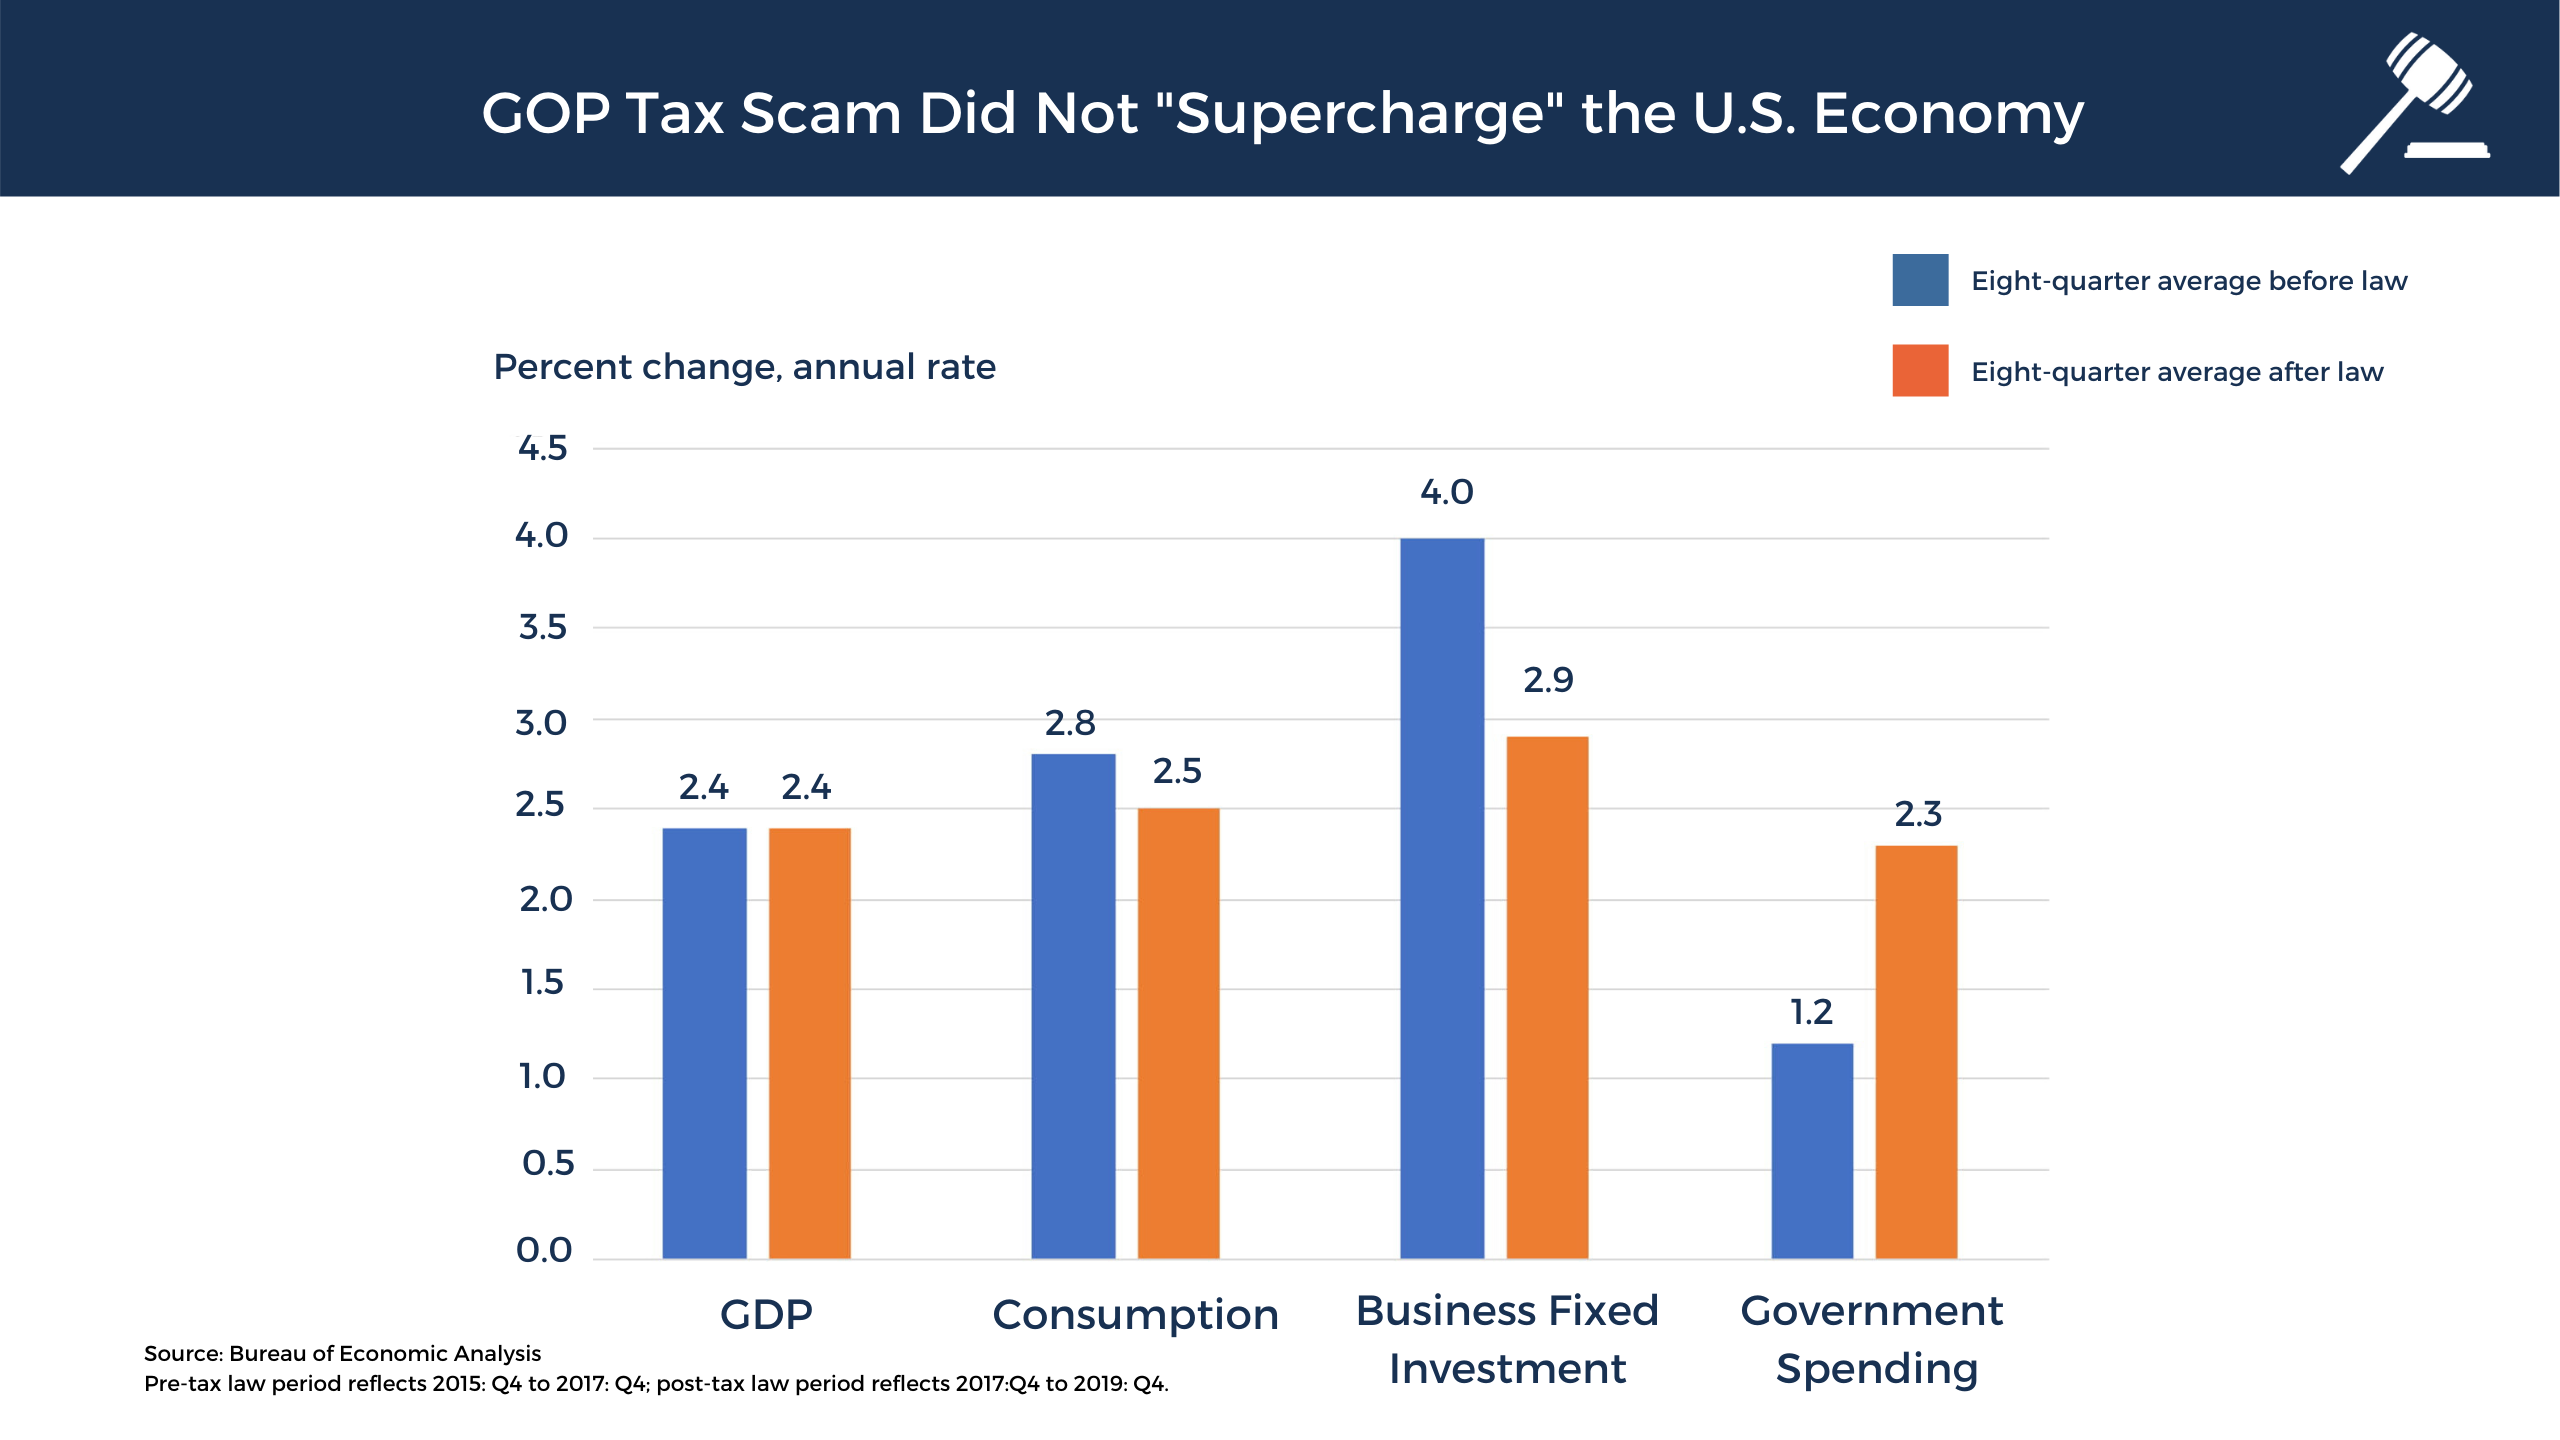 The #GOPTaxScam did not supercharge the economy